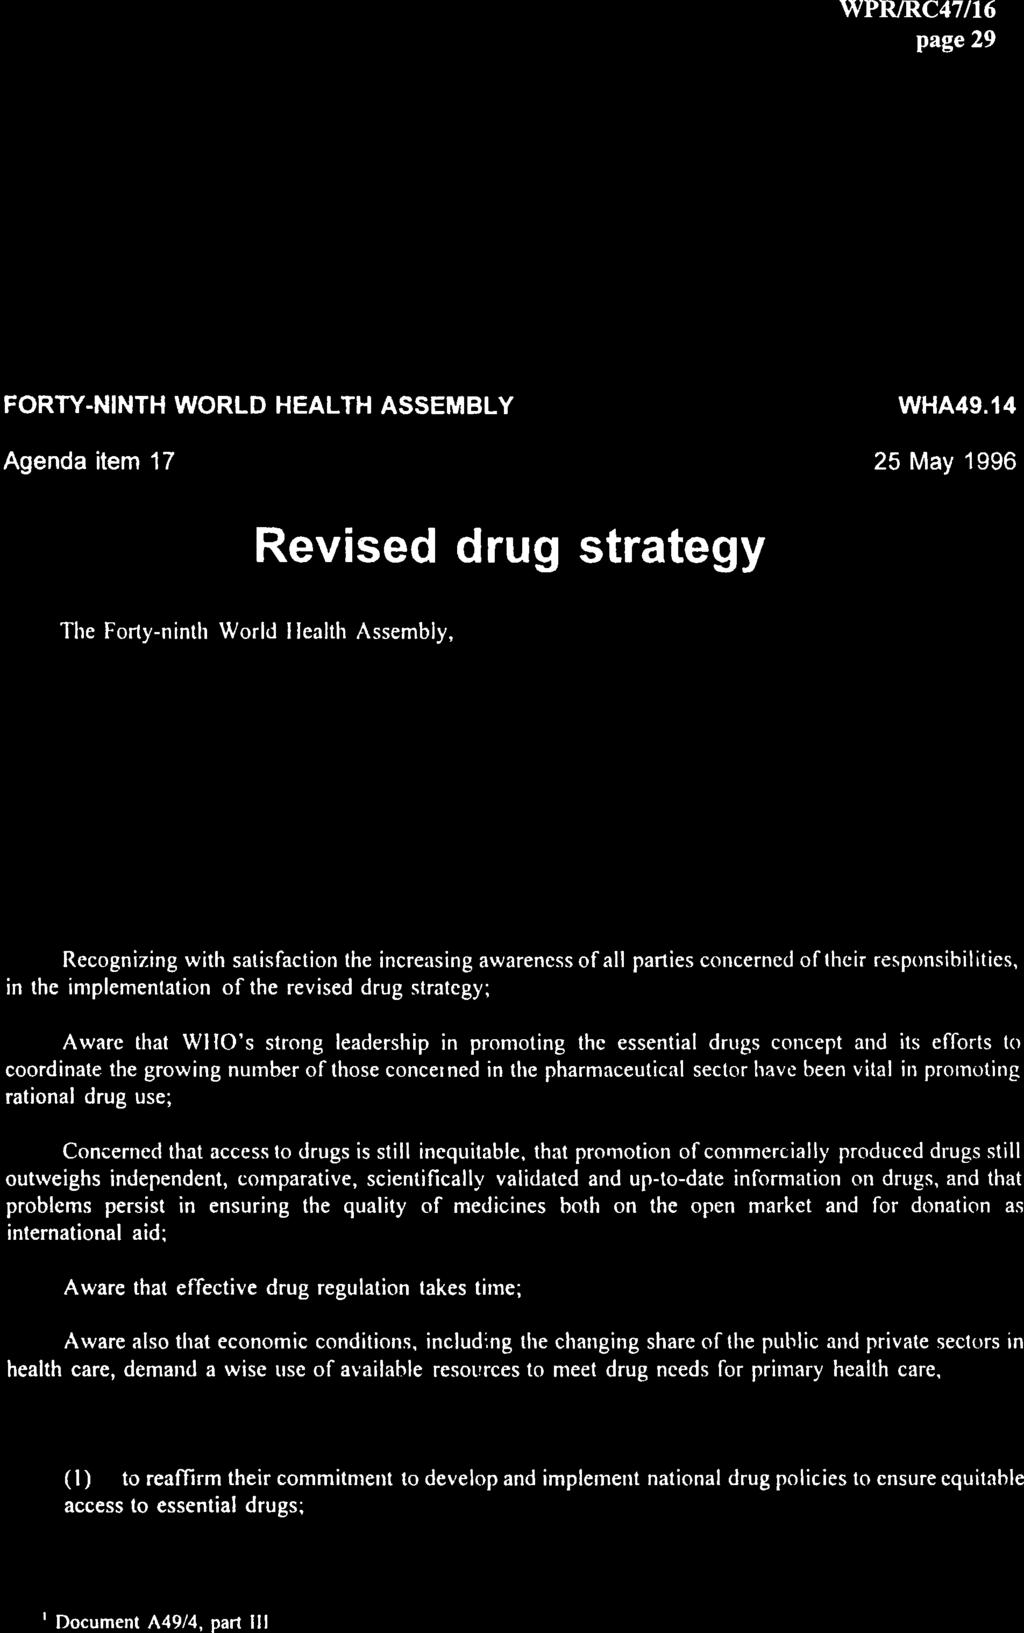 17; Having considered the report of the Director-General on the revised drug str:ttegy; 1 Noting the activities of WHO to further the implementation of the revised drug strategy, in particular, the